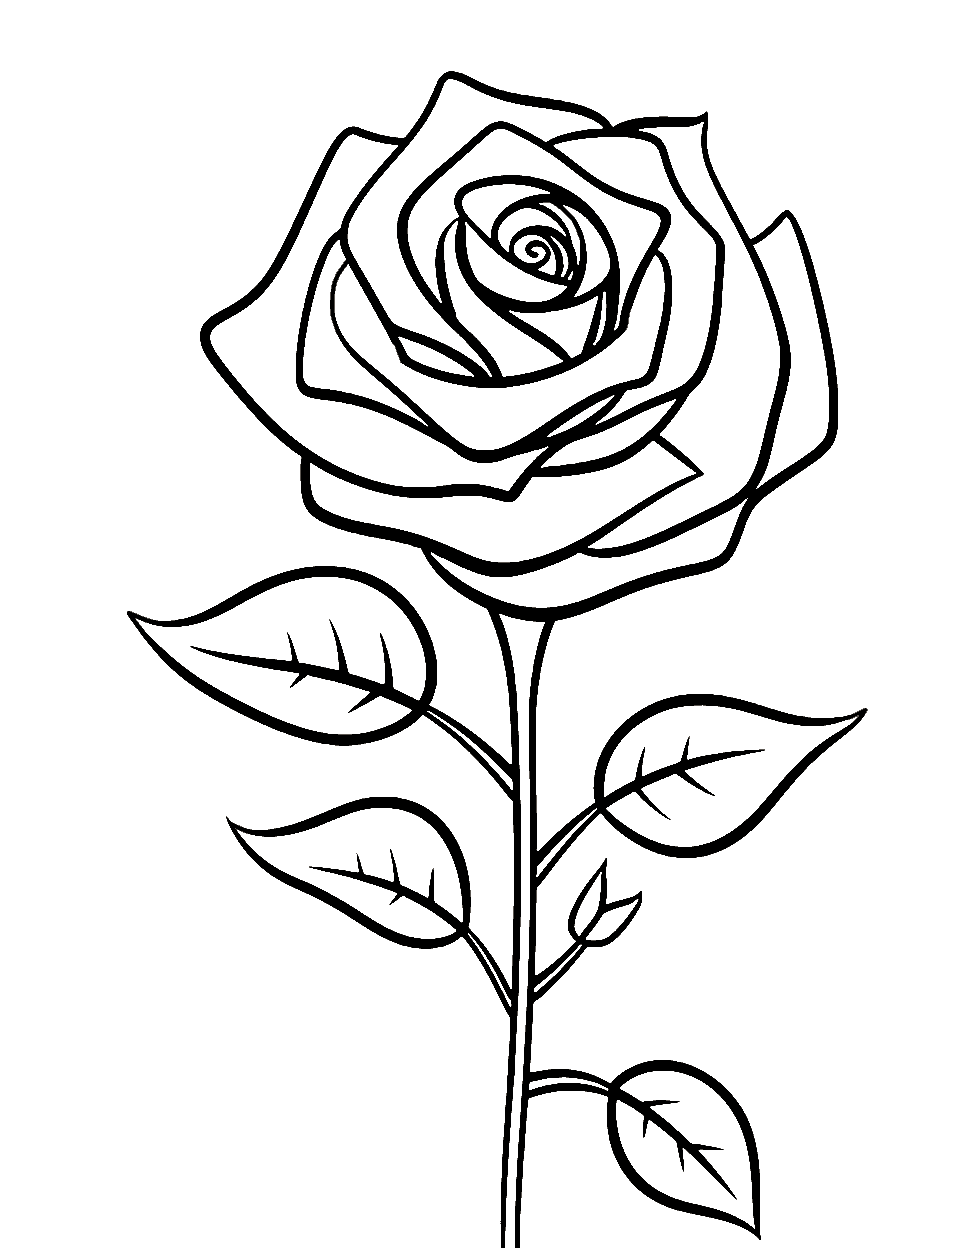 Simple Rose Drawing for Kids Coloring Page - A basic and kid-friendly drawing of a rose with large, easy-to-color petals.